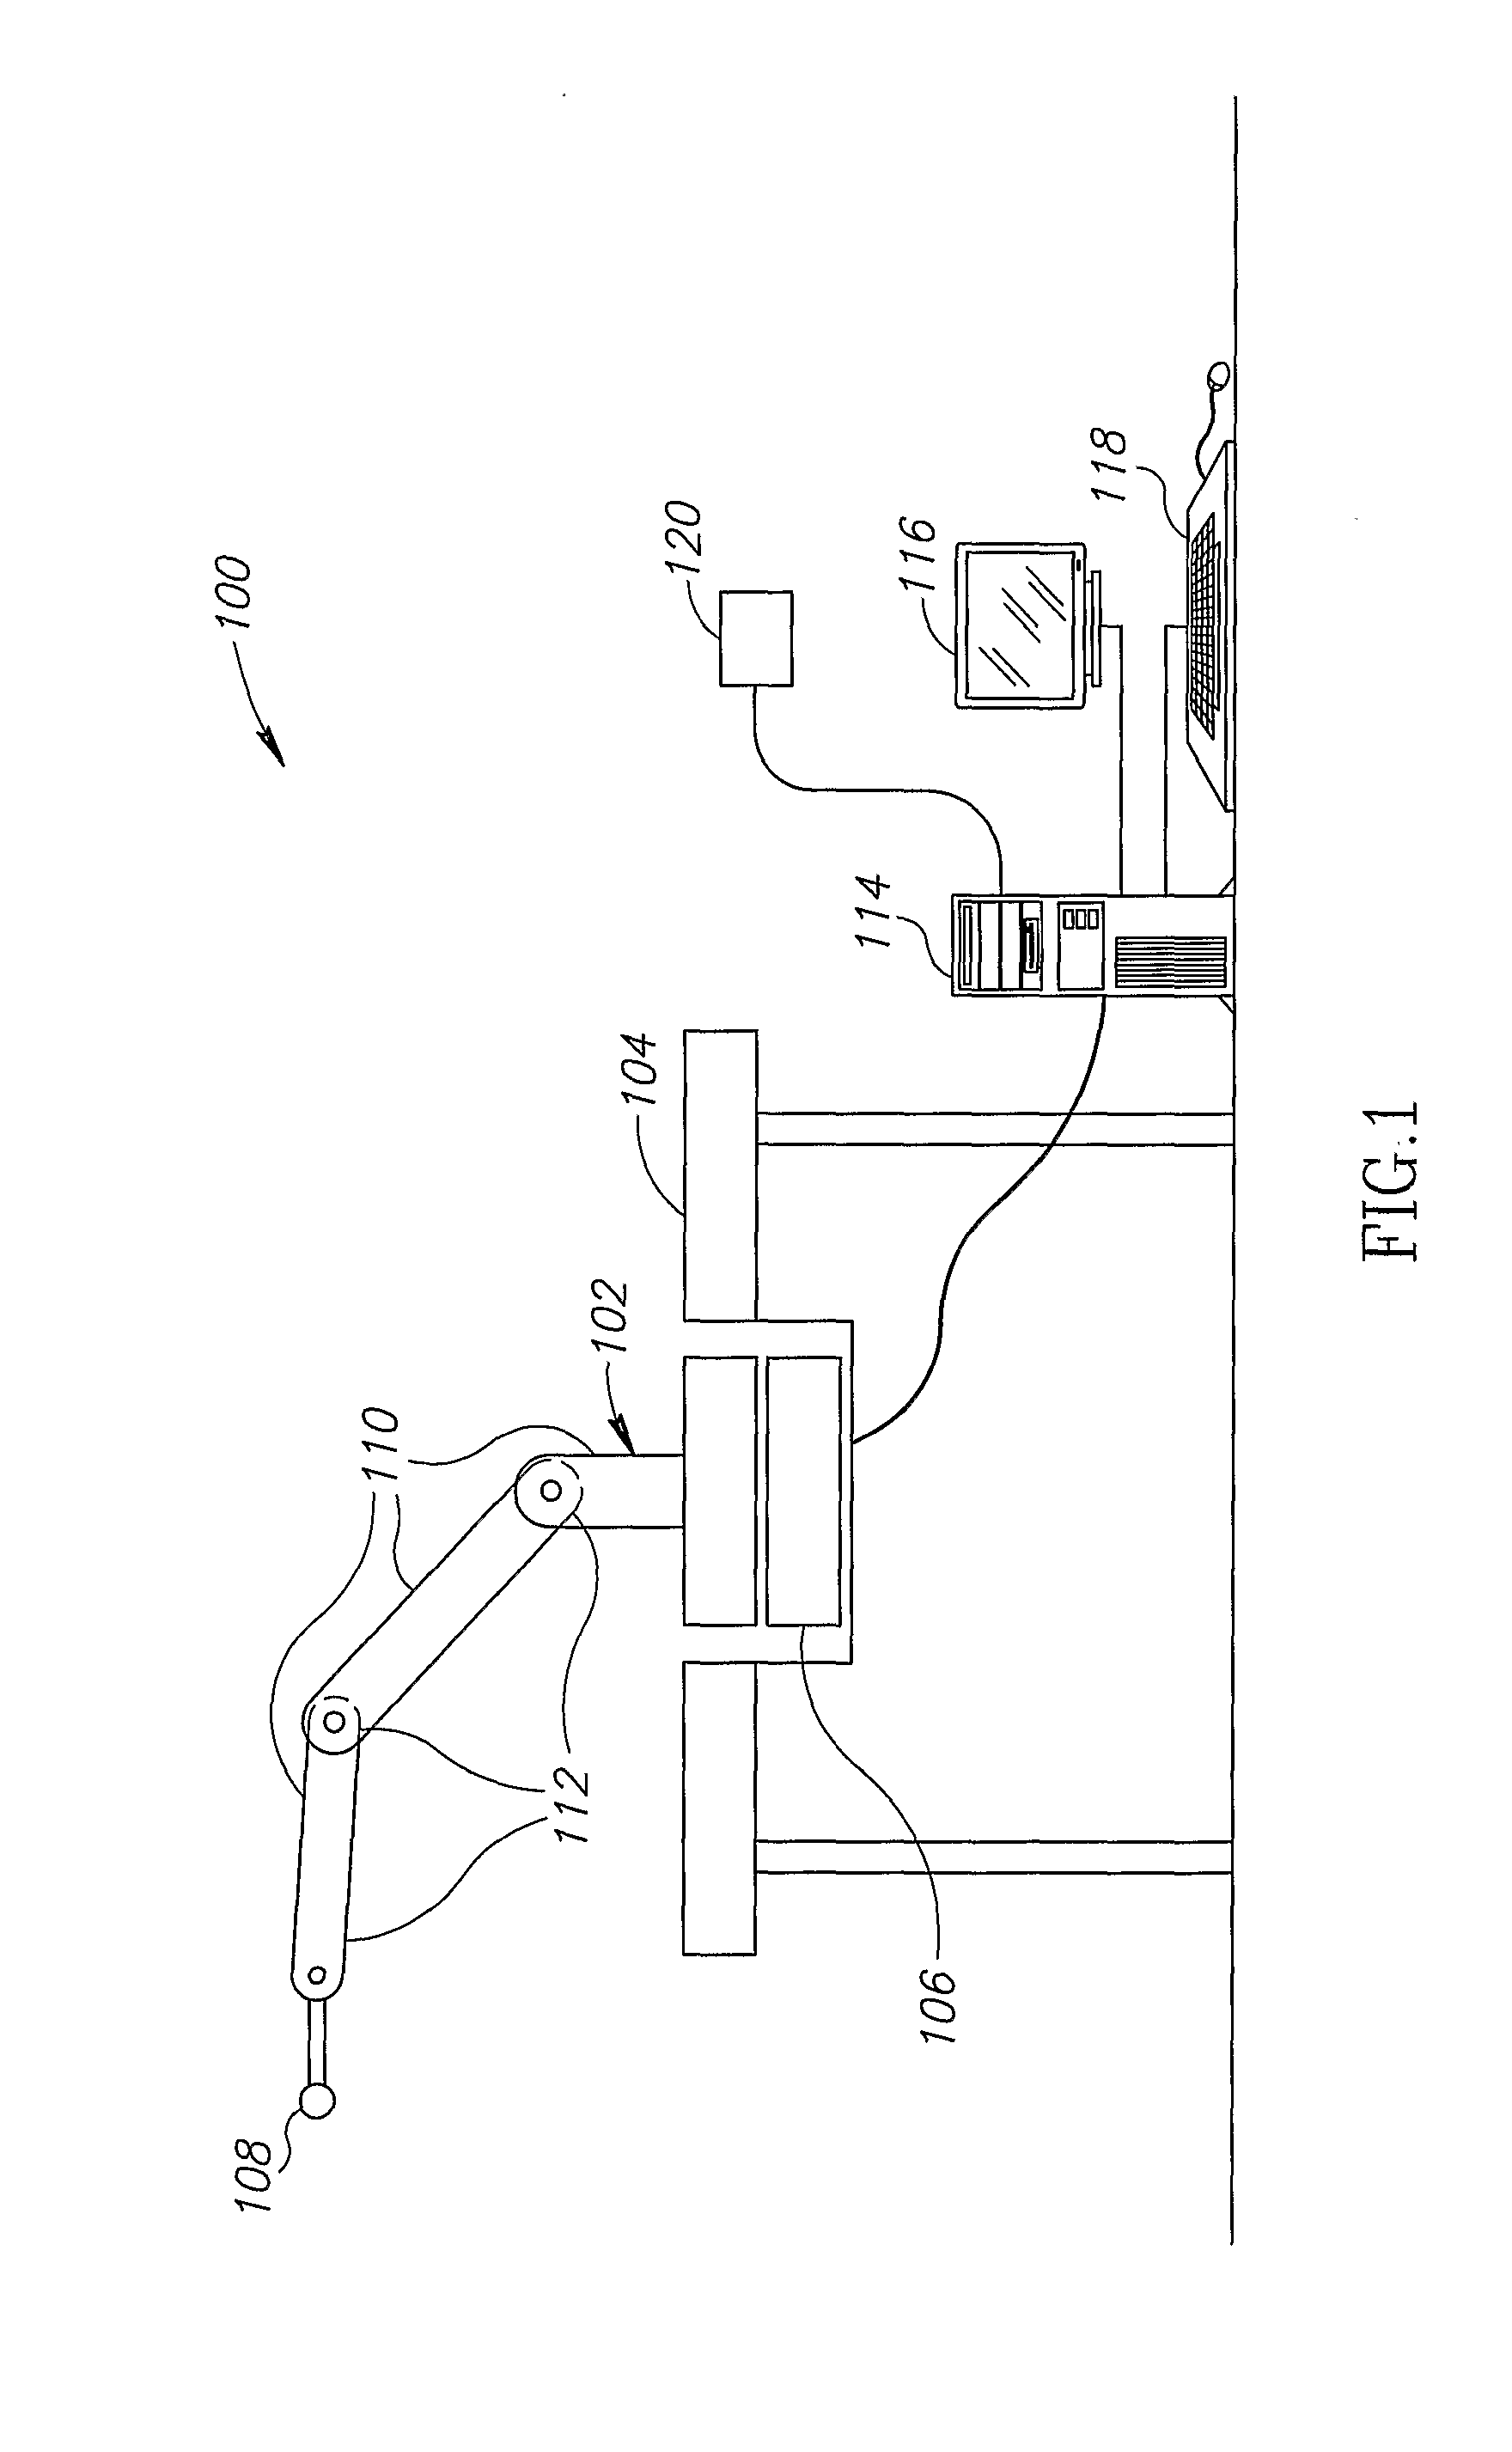 Methods and Apparatus for Rehabilitation and Training